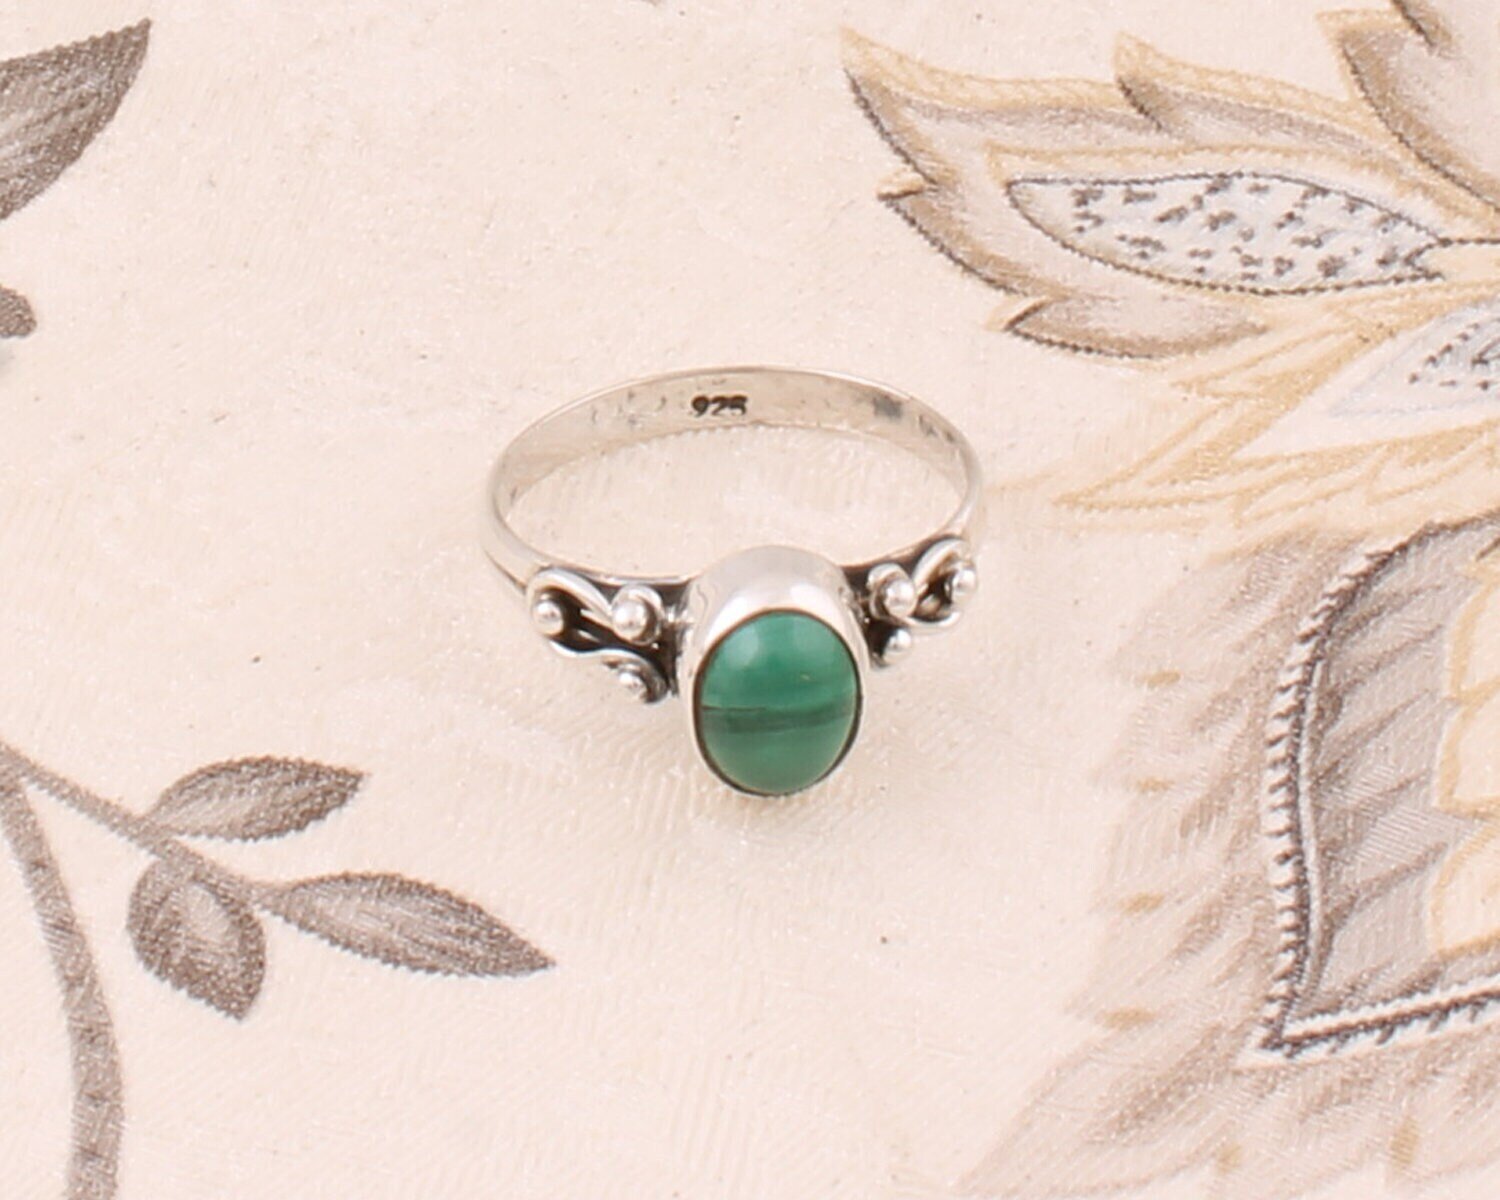 Solid Silver Ring Gift For You ! With Natural Malachite Gemstone Ring Top Rare Stone Boho Ring Handcrafted Middle Finger Ring L# -283359-R